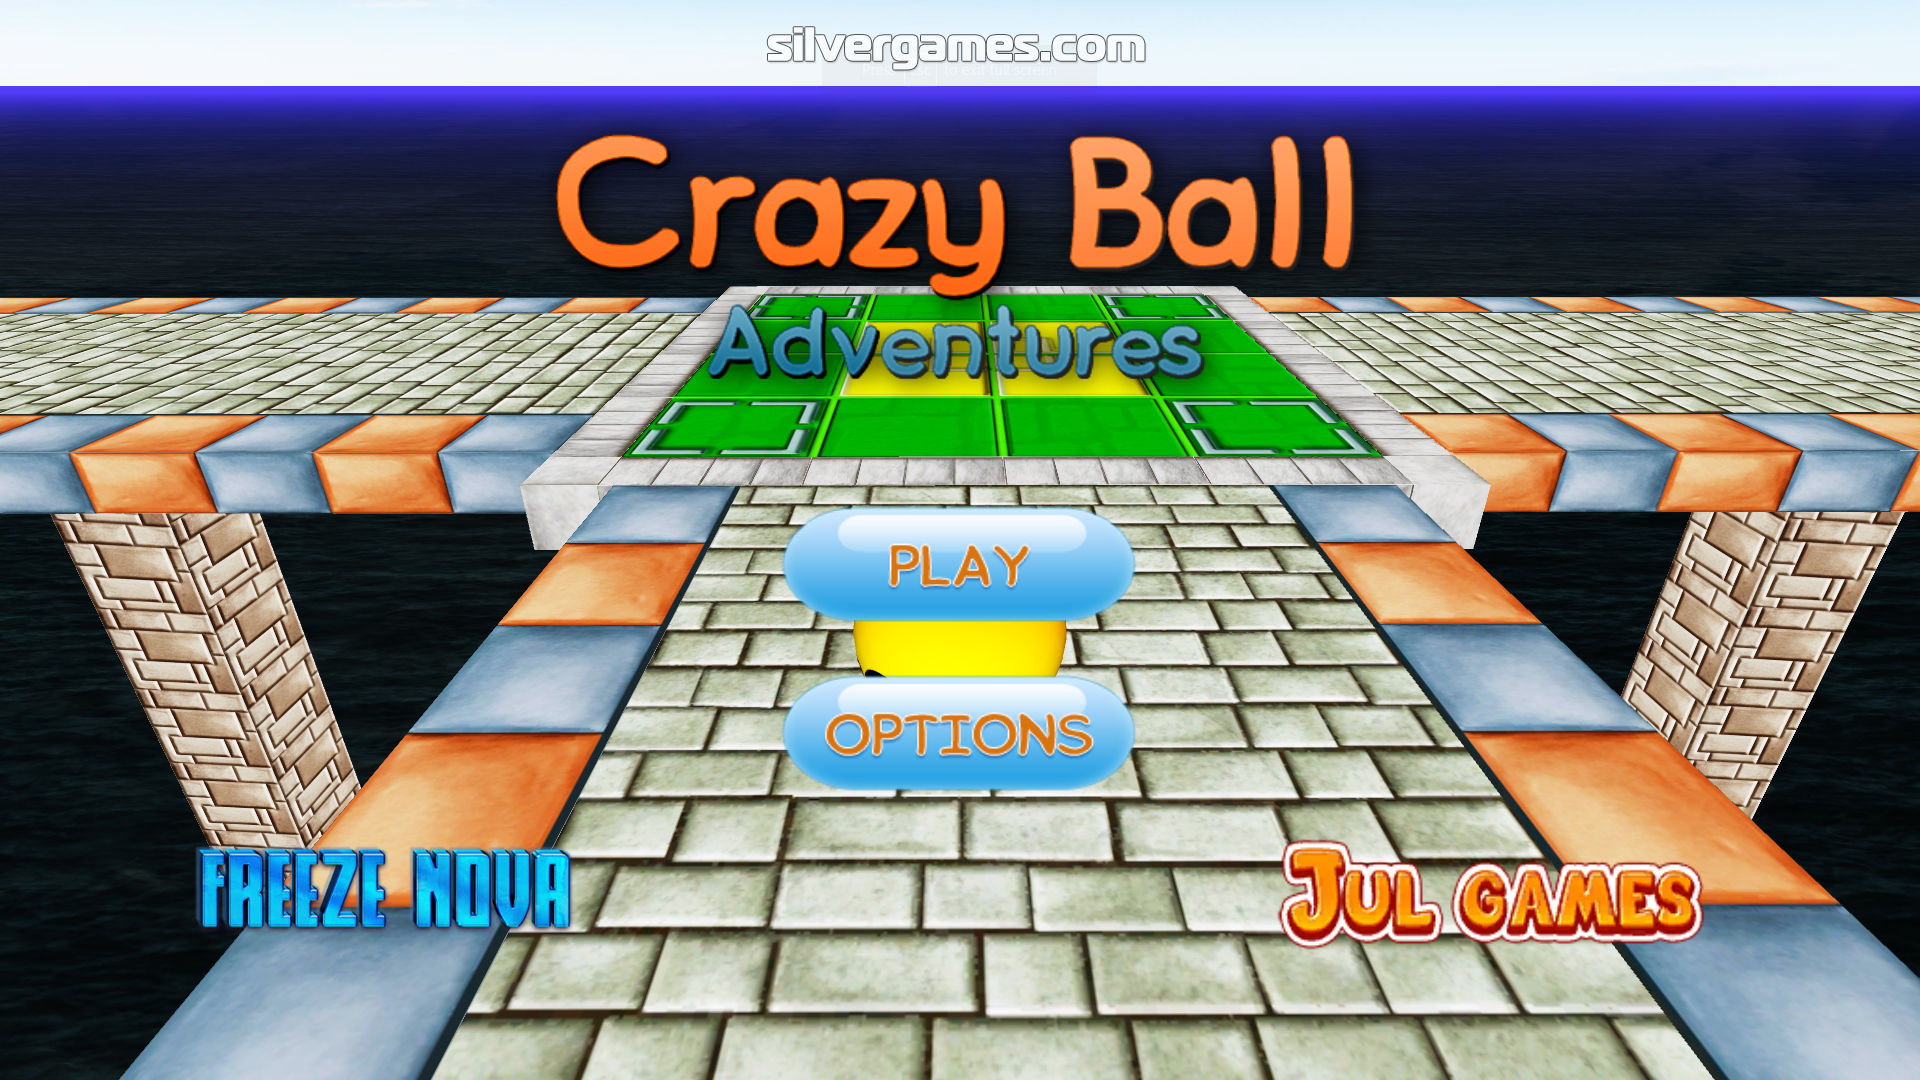 World's Hardest Game 🕹️ Play on CrazyGames